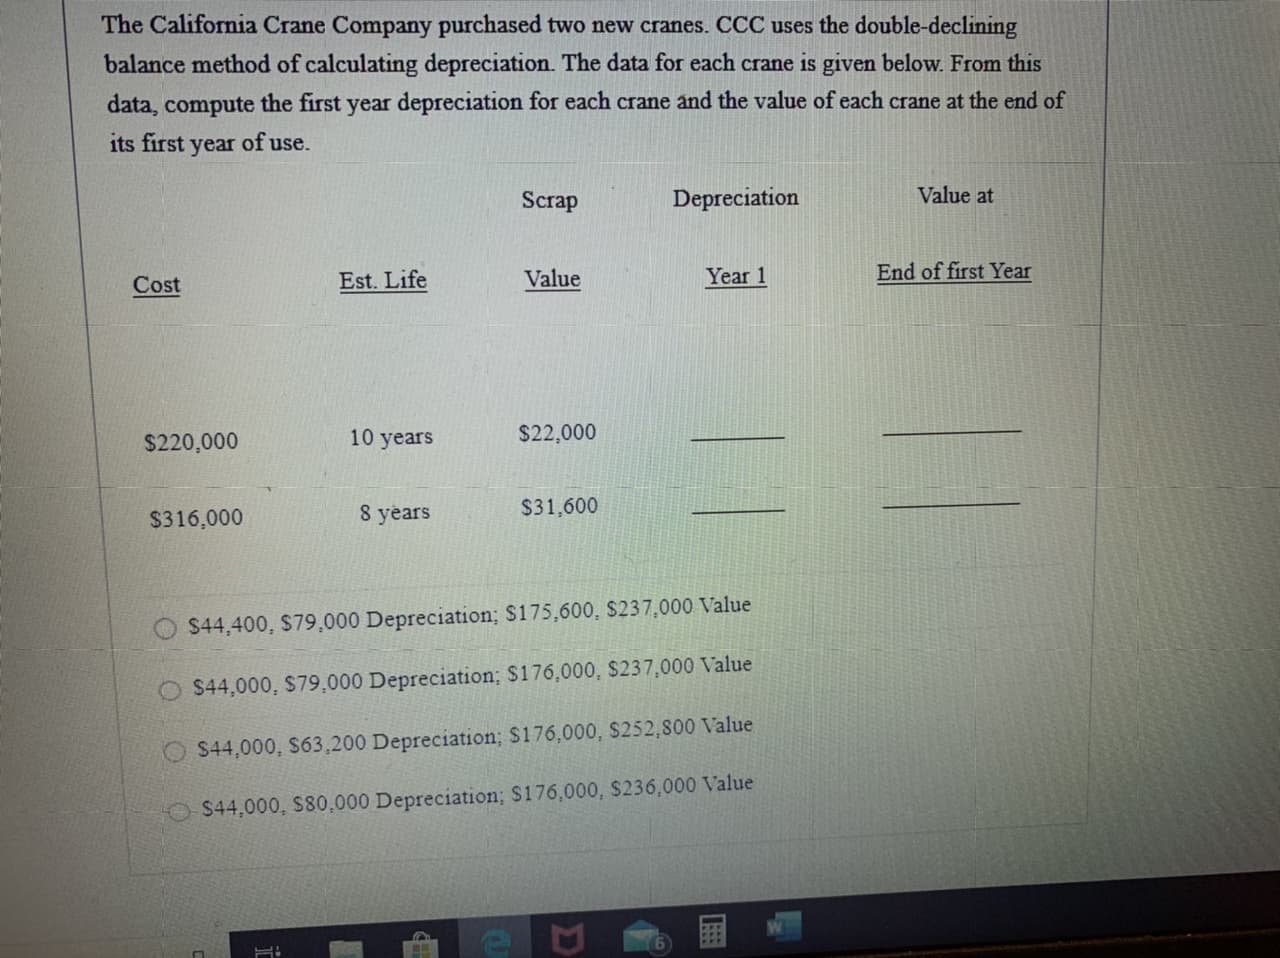 The California Crane Company purchased two new cranes. CCC uses the double-declining
balance method of calculating depreciation. The data for each crane is given below. From this
data, compute the first year depreciation for each crane and the value of each crane at the end of
its first year of use.
Scrap
Depreciation
Value at
Cost
Est. Life
Value
Year 1
End of first Year
$220,000
10 years
$22,000
$316,000
8 years
$31,600
$44,400, $79,000 Depreciation; $175,600, $237,000 Value
O $44,000, $79,000 Depreciation; $176,000, $237,000 Value
S44,000, S63,200 Depreciation; $176,000, $252,800 Value
S44,000, S80,000 Depreciation; S176,000, S236,000 Value
